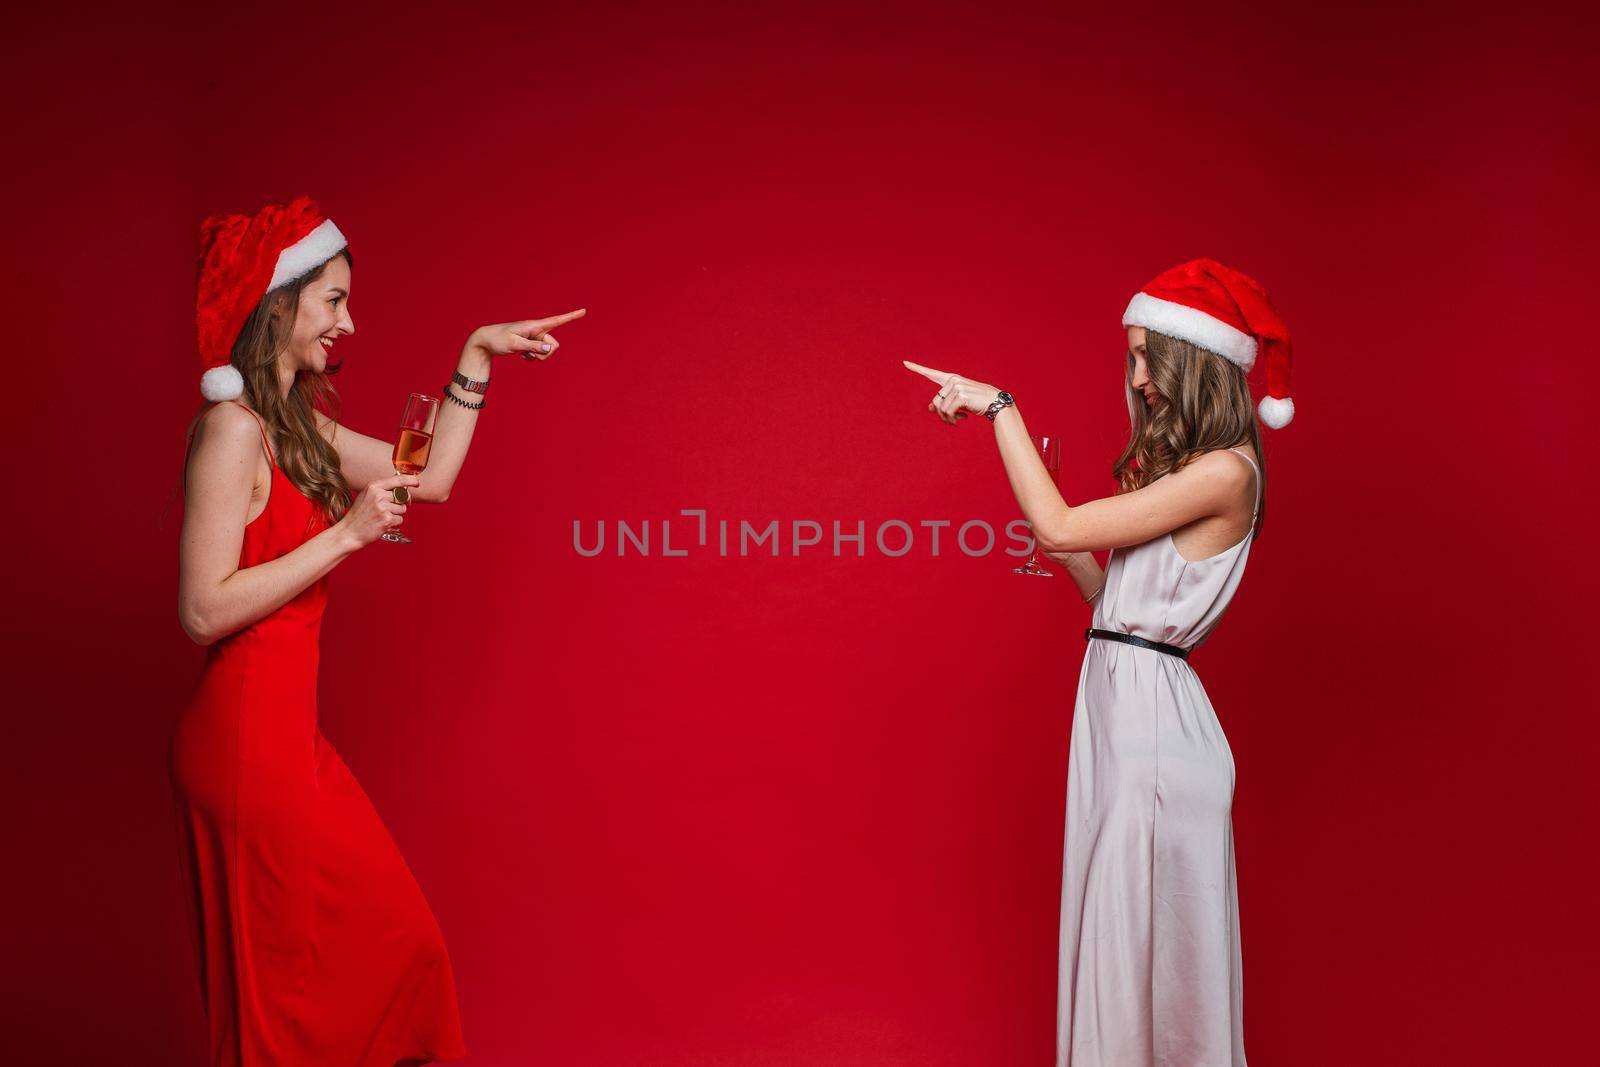 Side view of smiling pretty young women in santa hats pointing fingers at each other, isolated on red background. Party concept